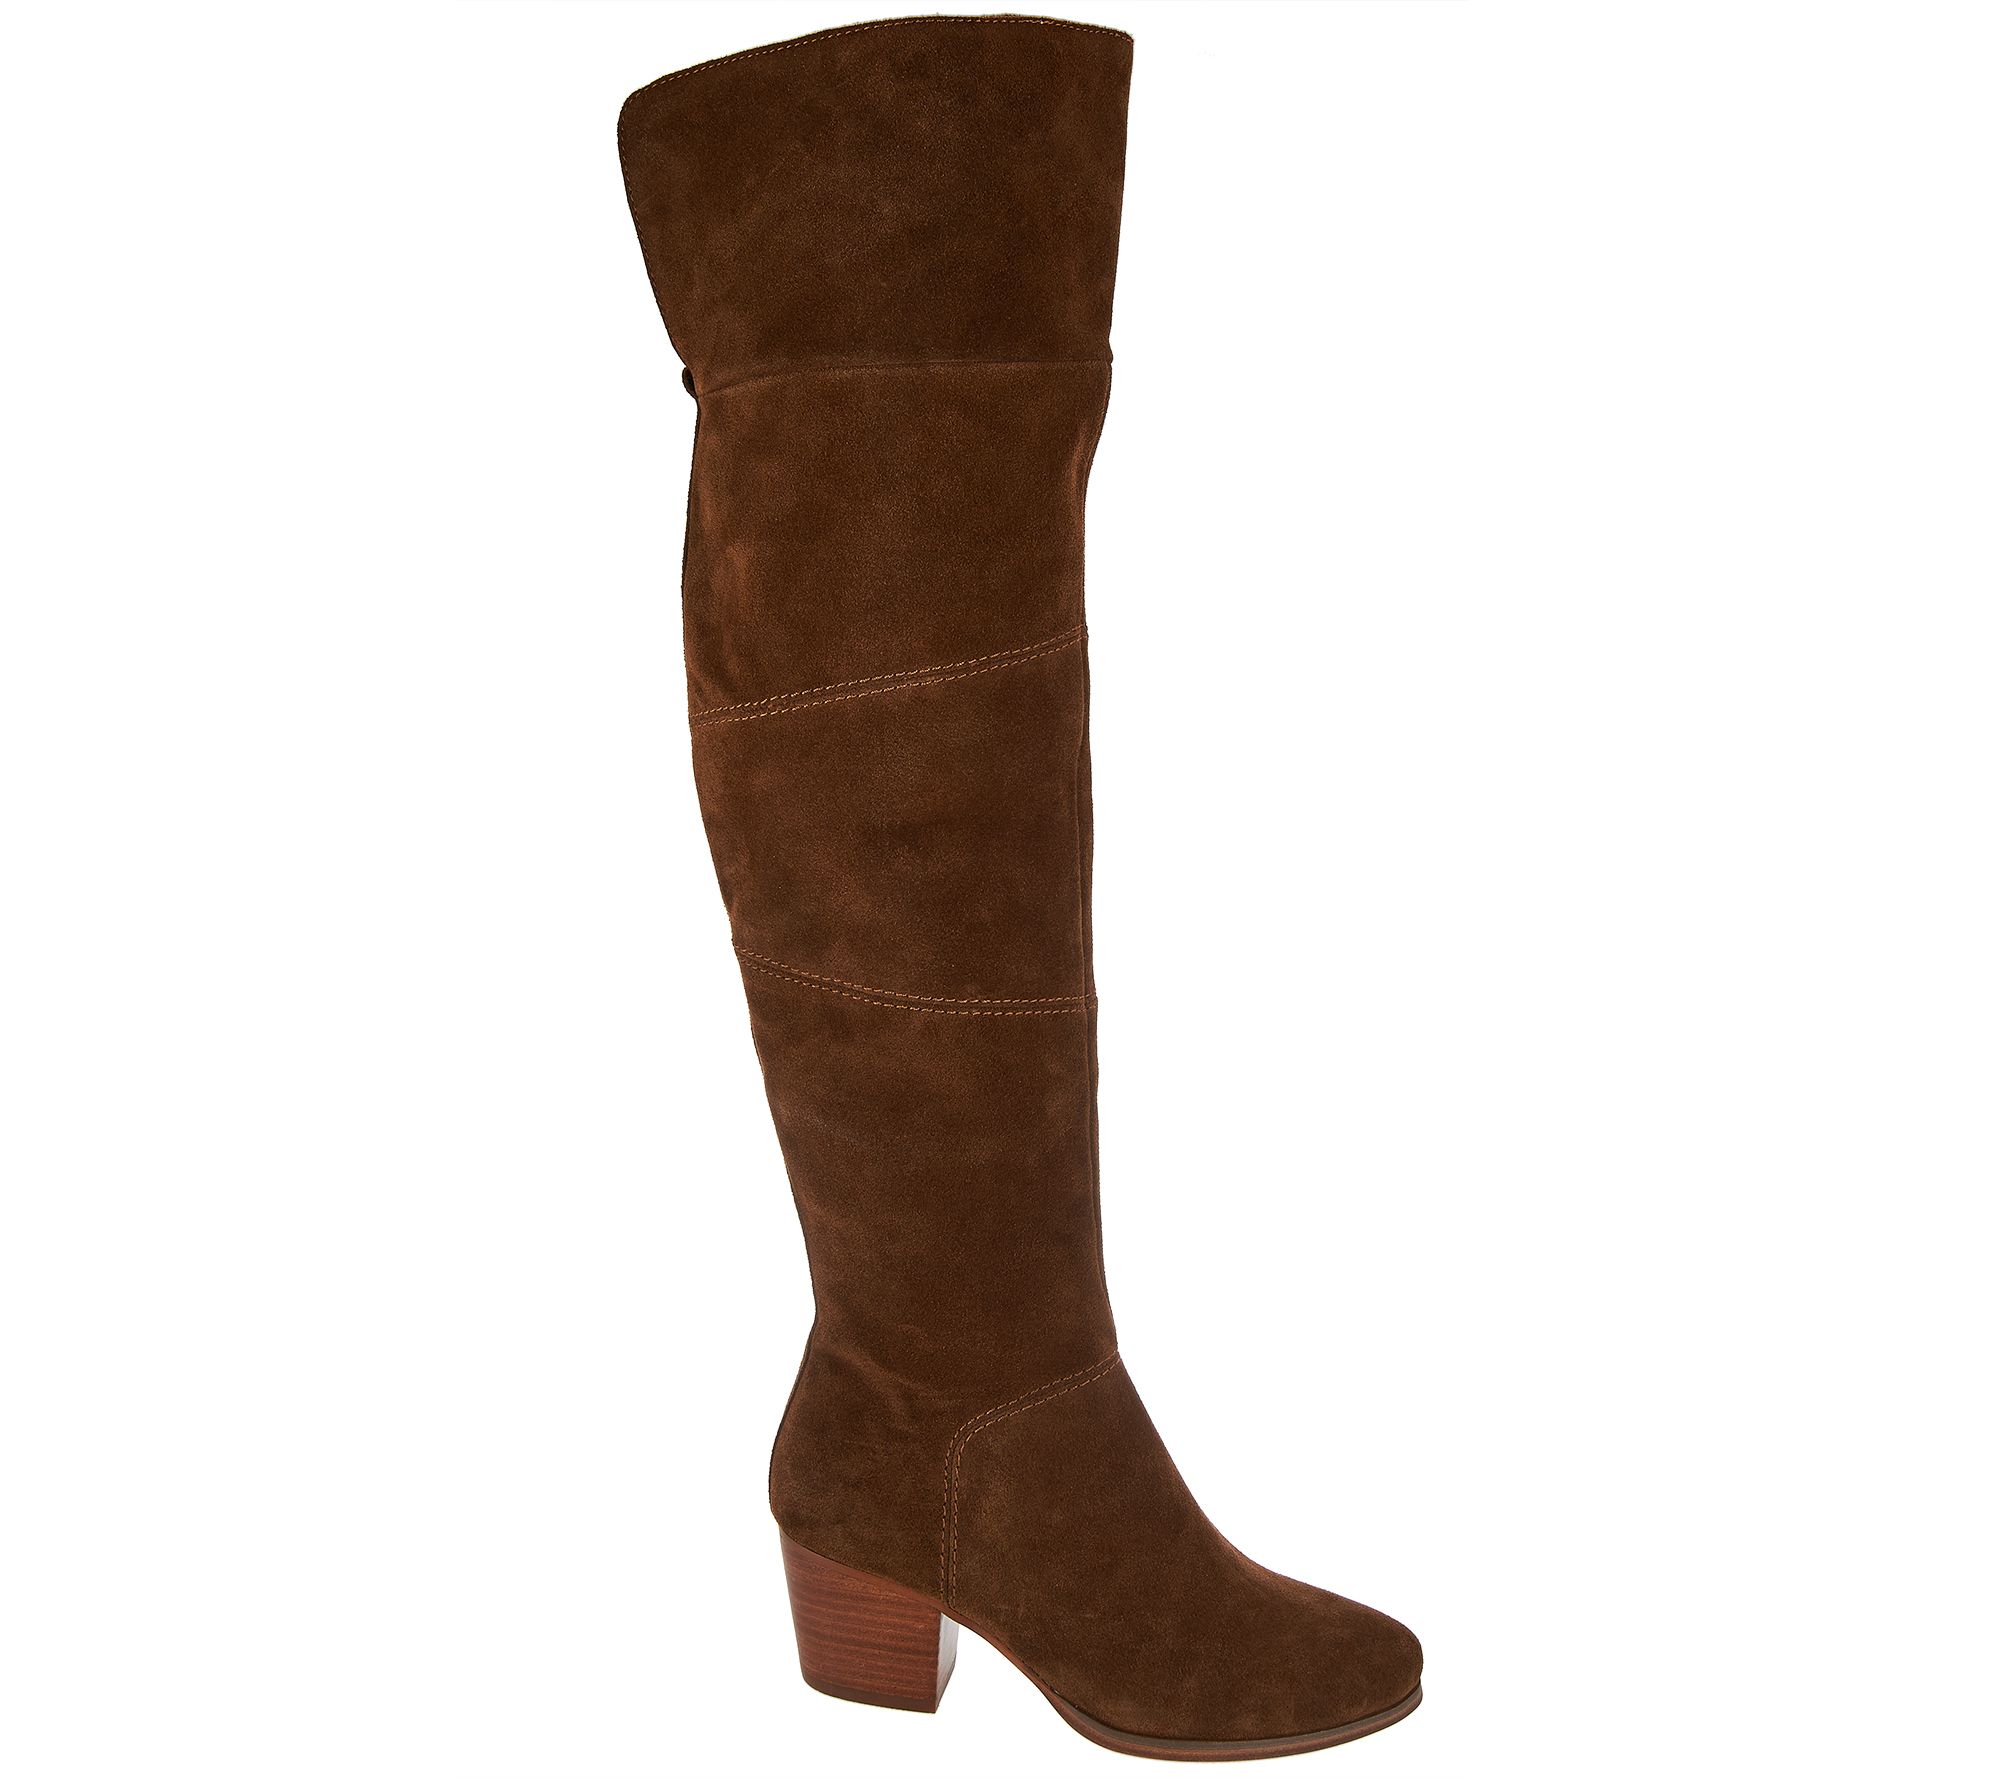 Sole Society Suede Over the Knee Boots - Melbourne - QVC.com